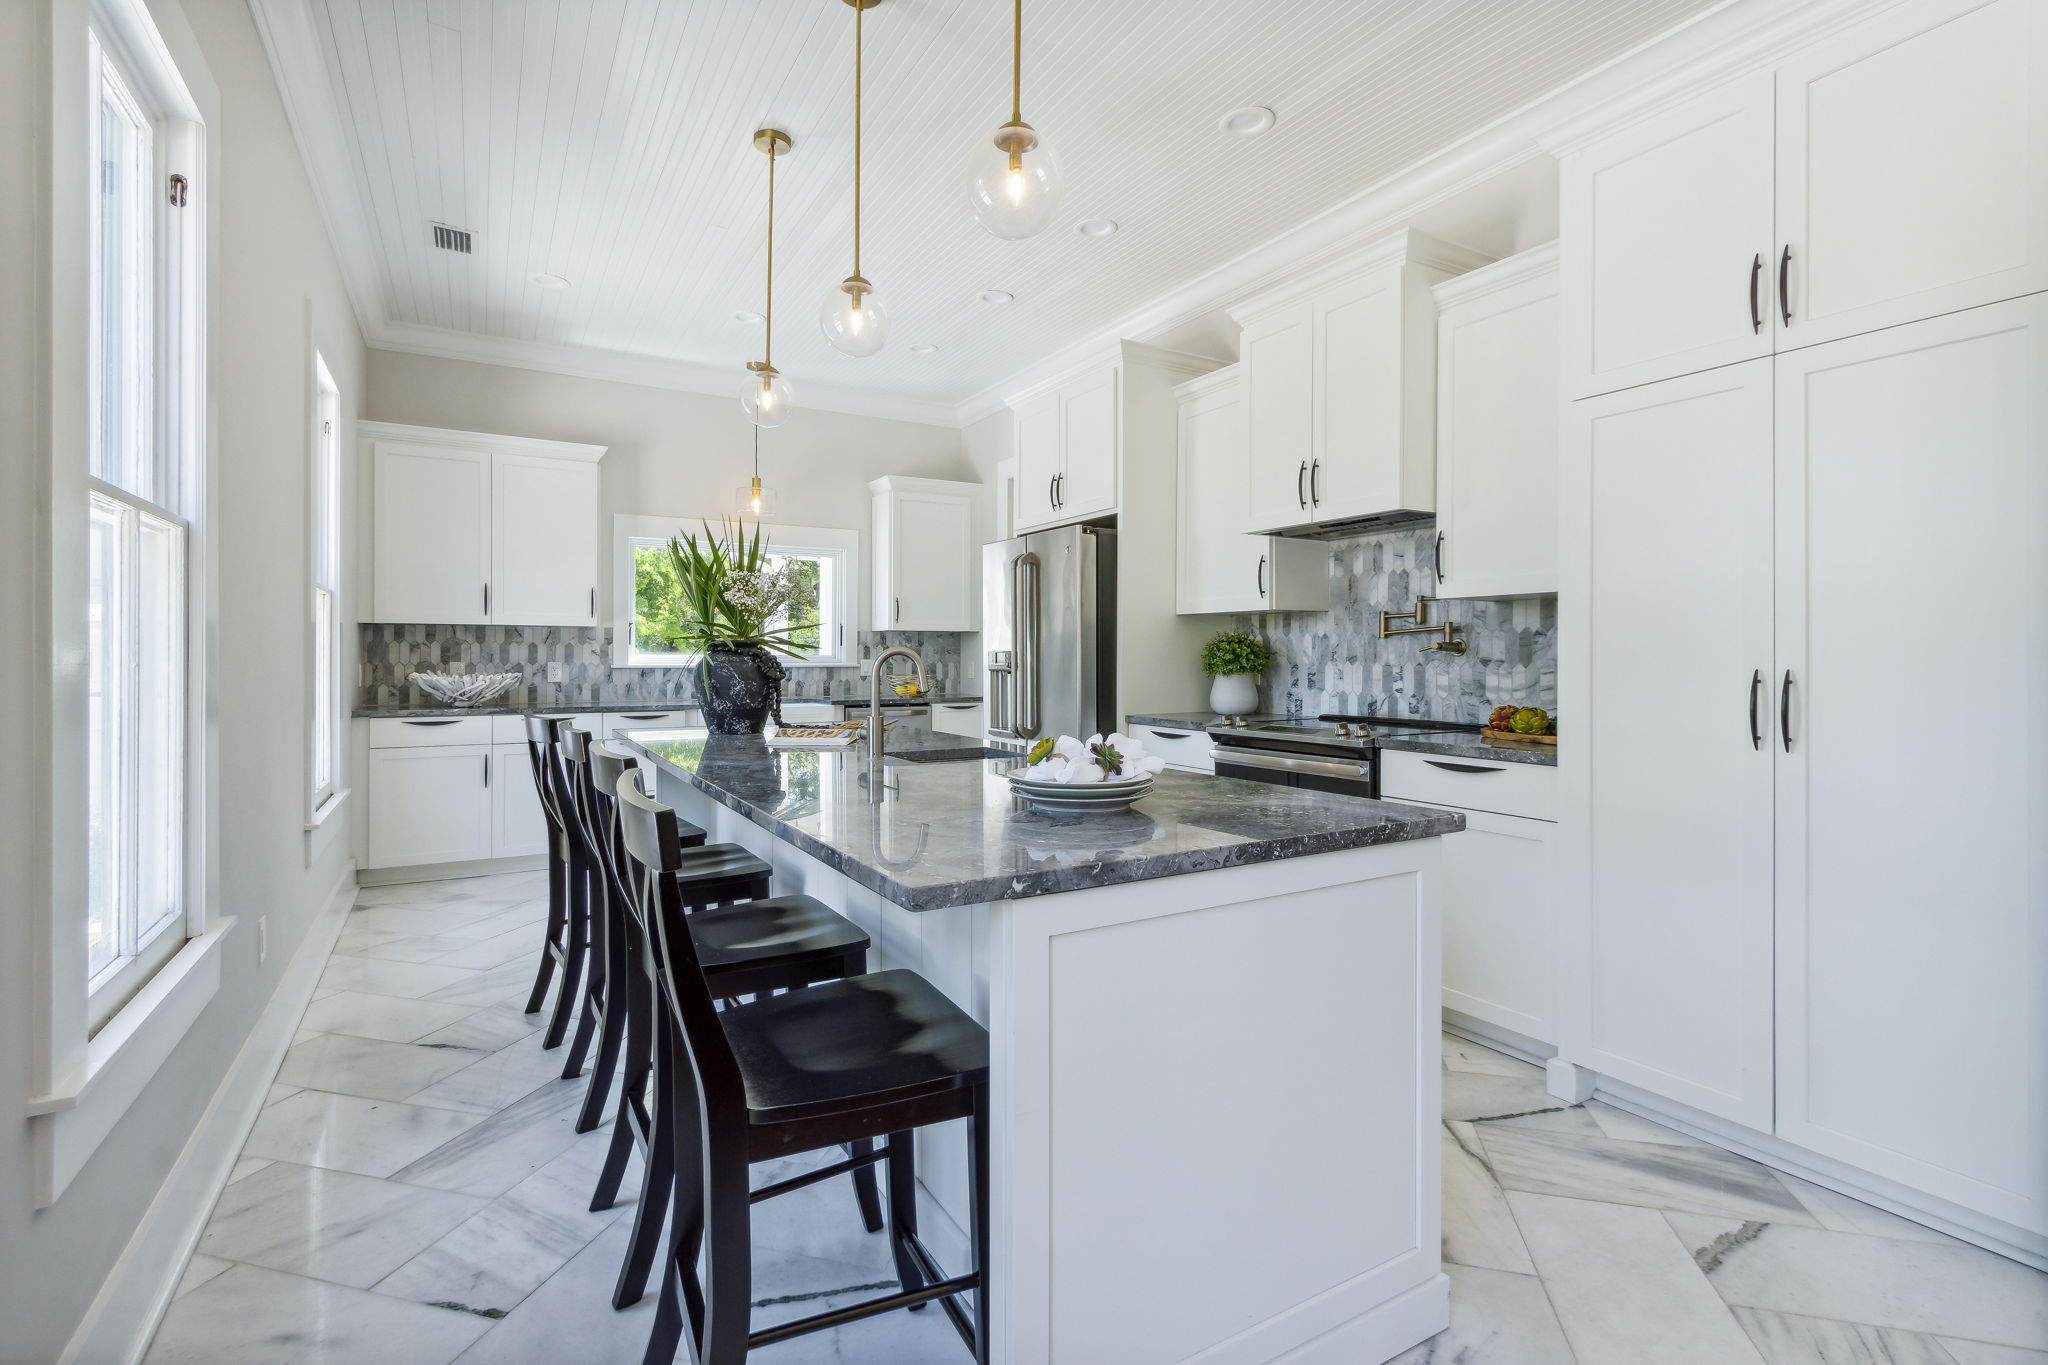 Marble floors were installed throughout the kitchen